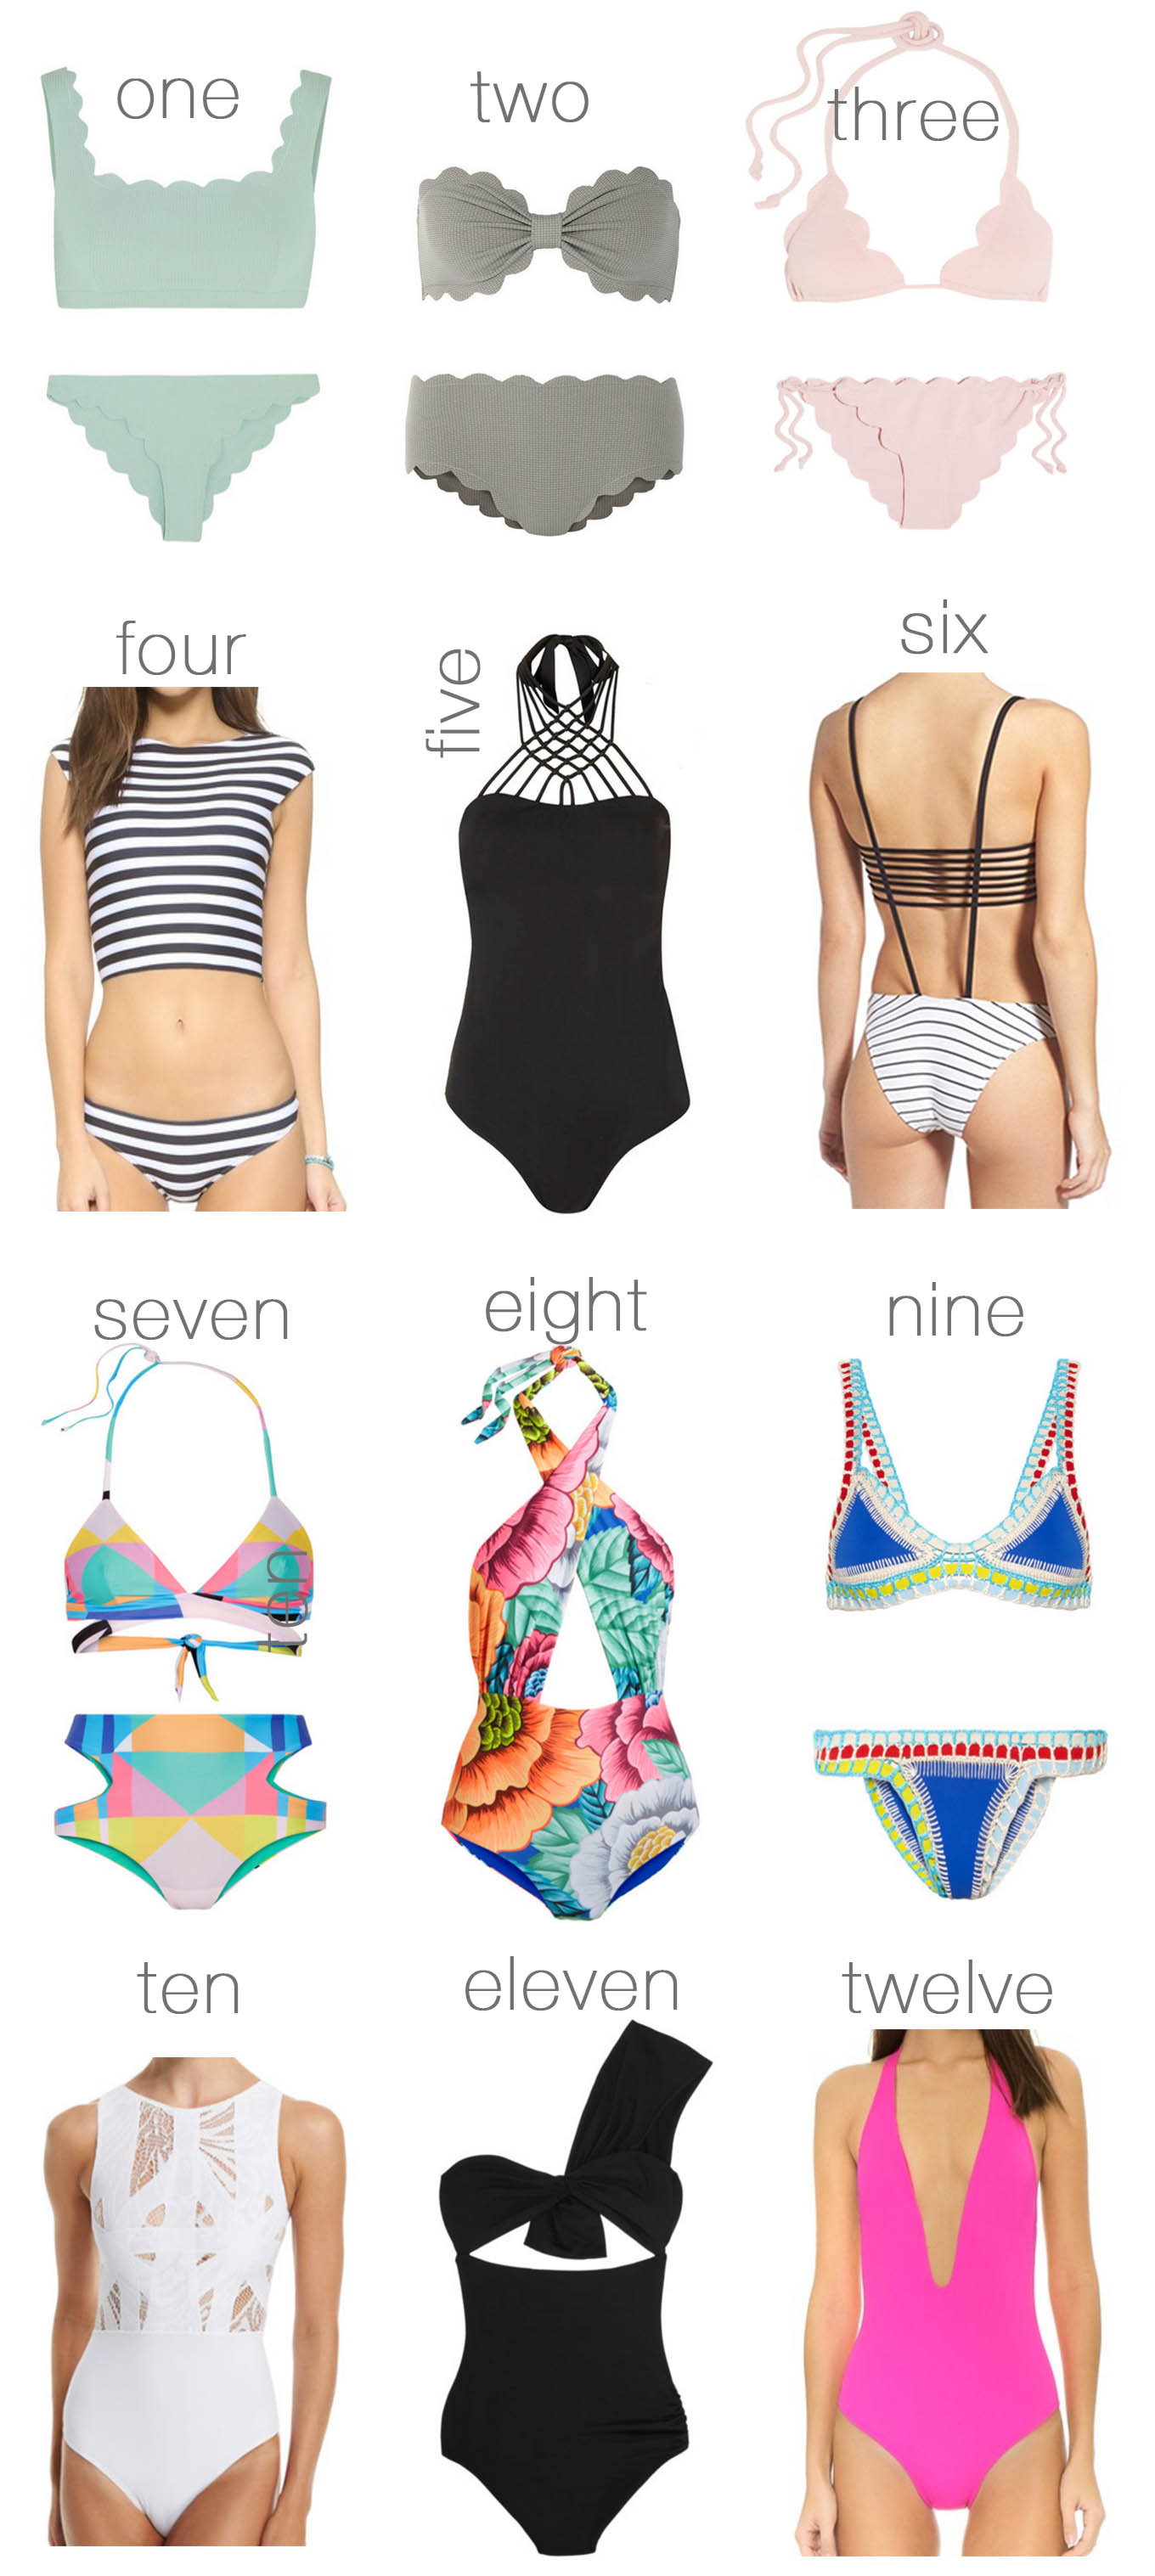 12 Swimsuits to Kick Off Your Summer in Style | Hello Fashion | Bloglovin’